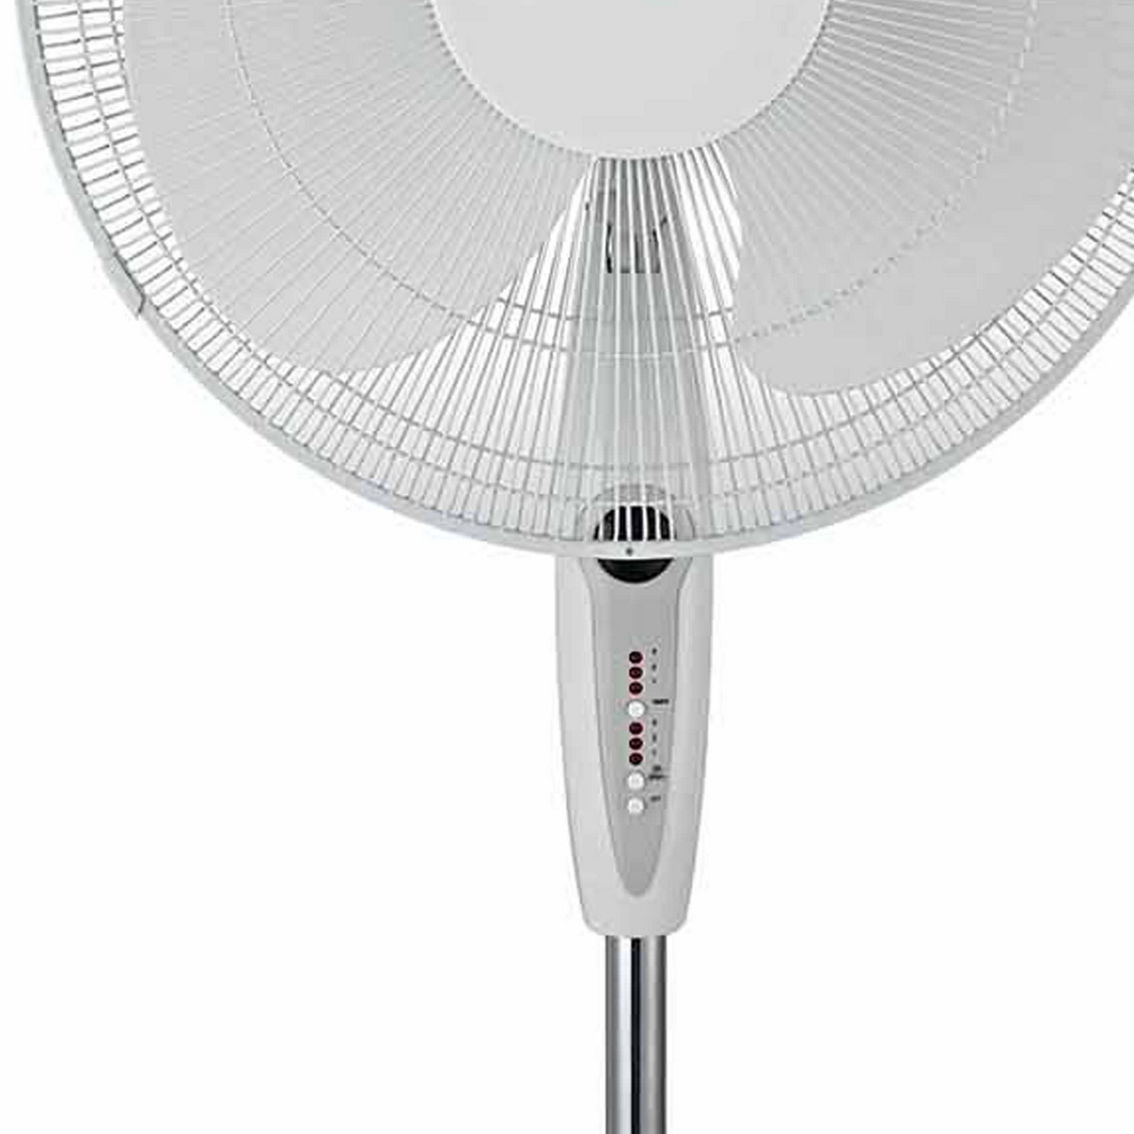 Optimus 16 in. Oscillating Stand Fan with Remote Control - Image 2 of 3